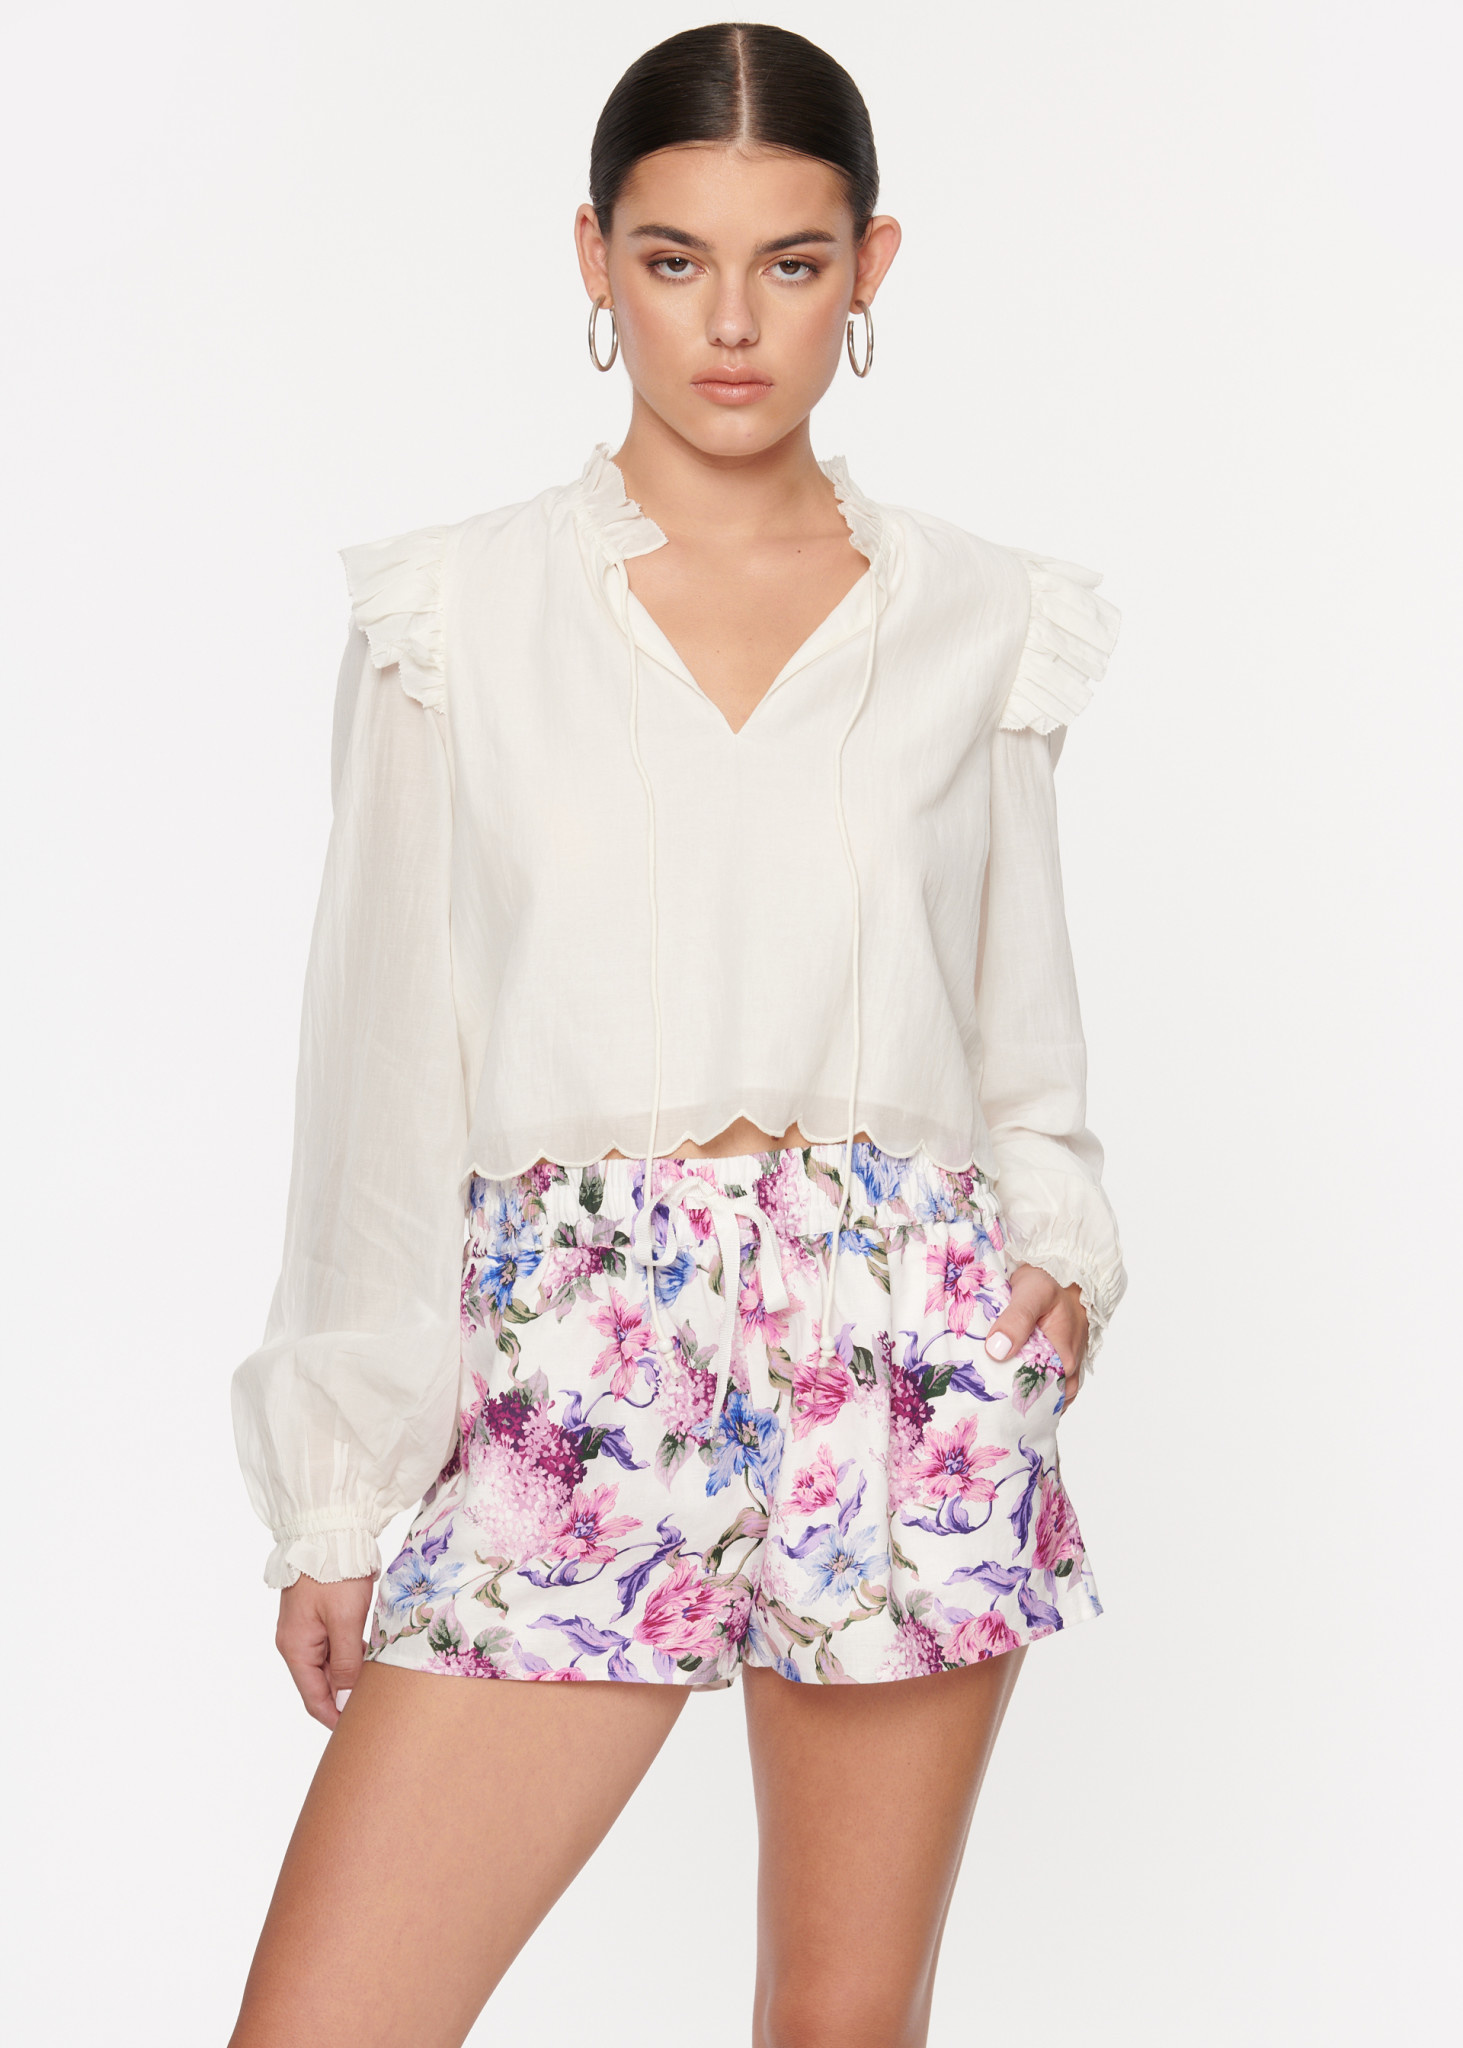 CAMI NYC Tiana Top in White - Chic and Timeless Design - I Am More